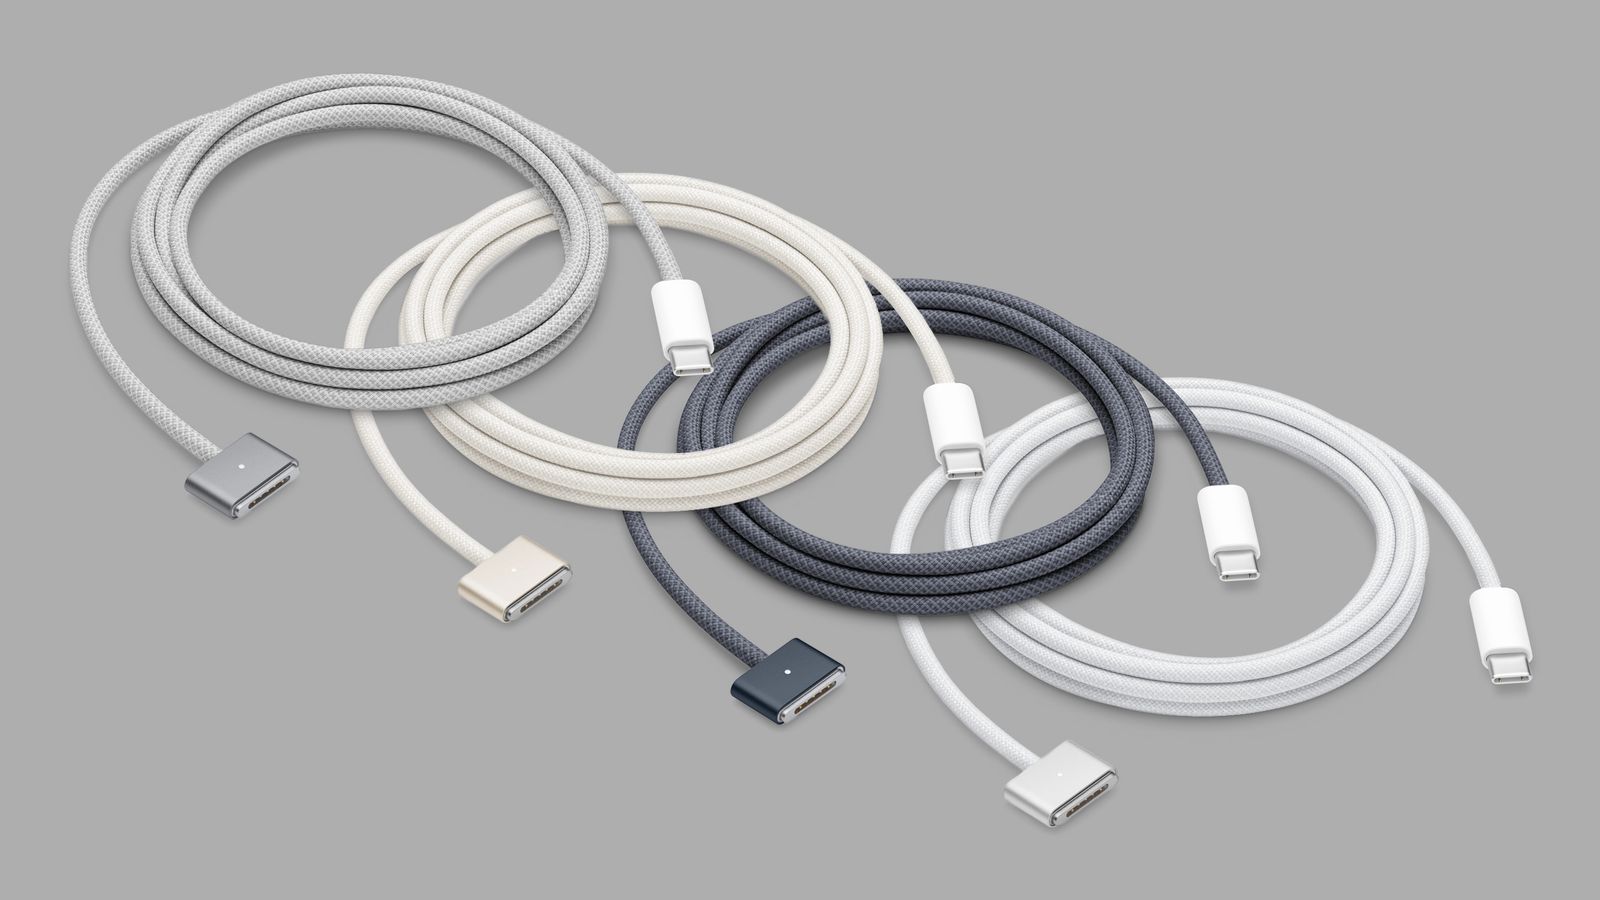 https://images.macrumors.com/t/Fs0wTH4F4sqi6Esw84CPeP6J604=/1600x0/article-new/2022/07/MagSafe-3-Cable-Midnight-Feature-fr.jpg